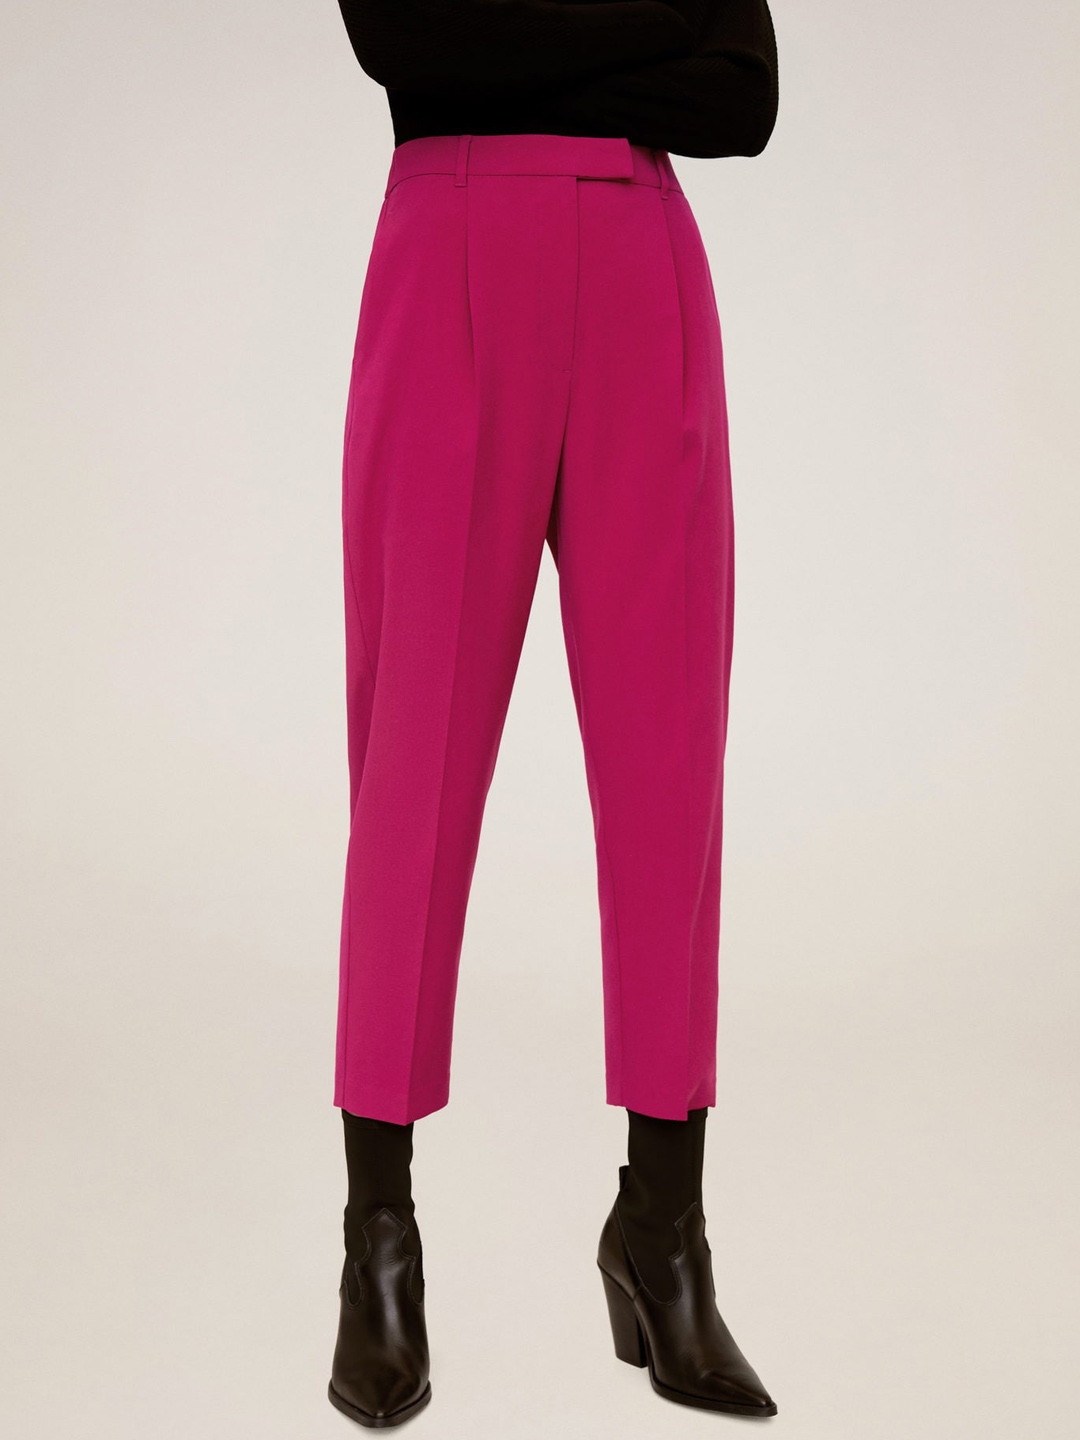 Silver cropped trousers and hot pink blouse  Style With a Smile link up   Style Splash